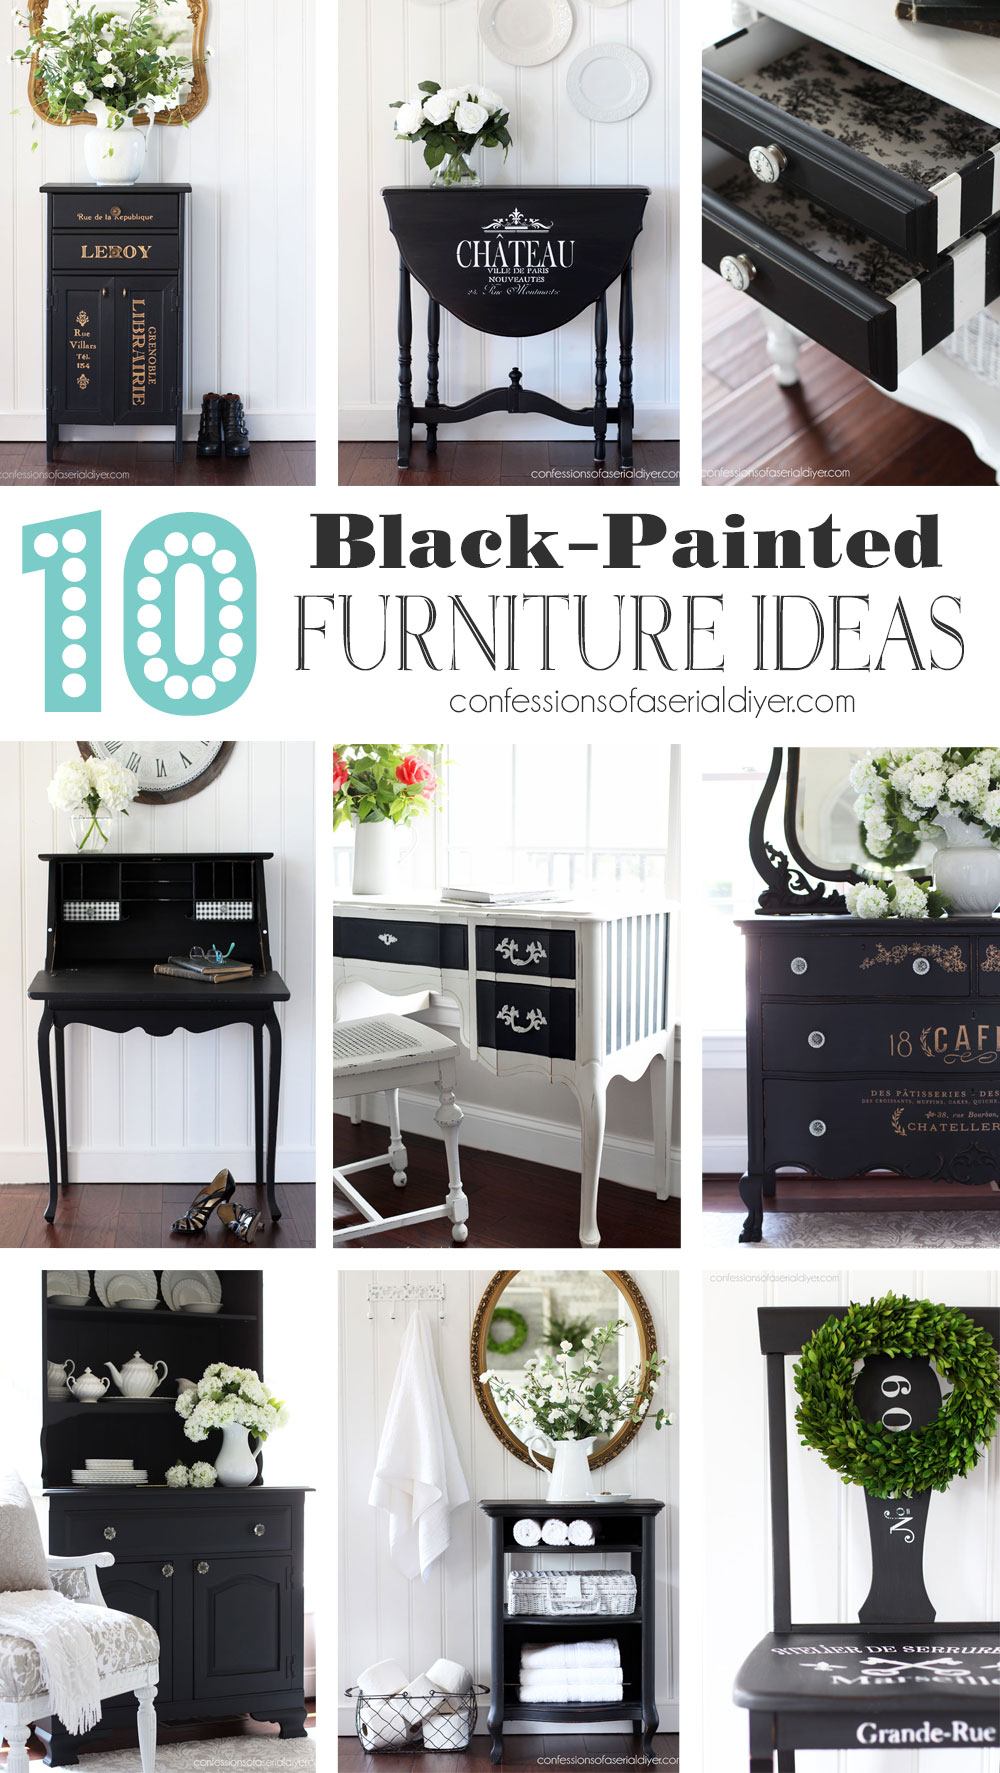 10 Black Painted Furniture Ideas  Confessions of a Serial Do-it-Yourselfer